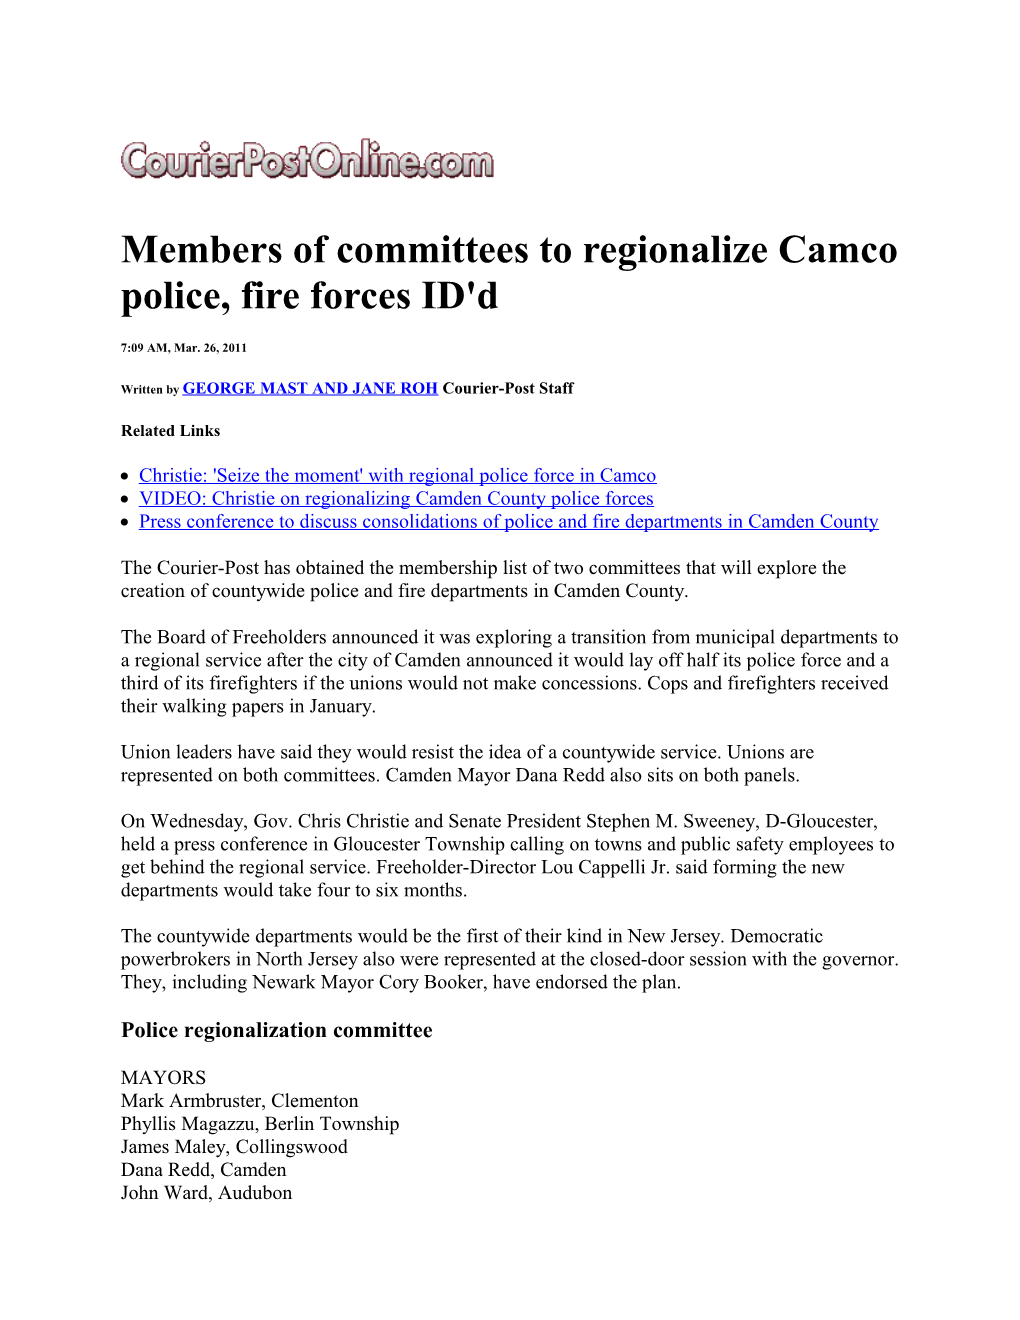 Members of Committees to Regionalize Camco Police, Fire Forces ID'd